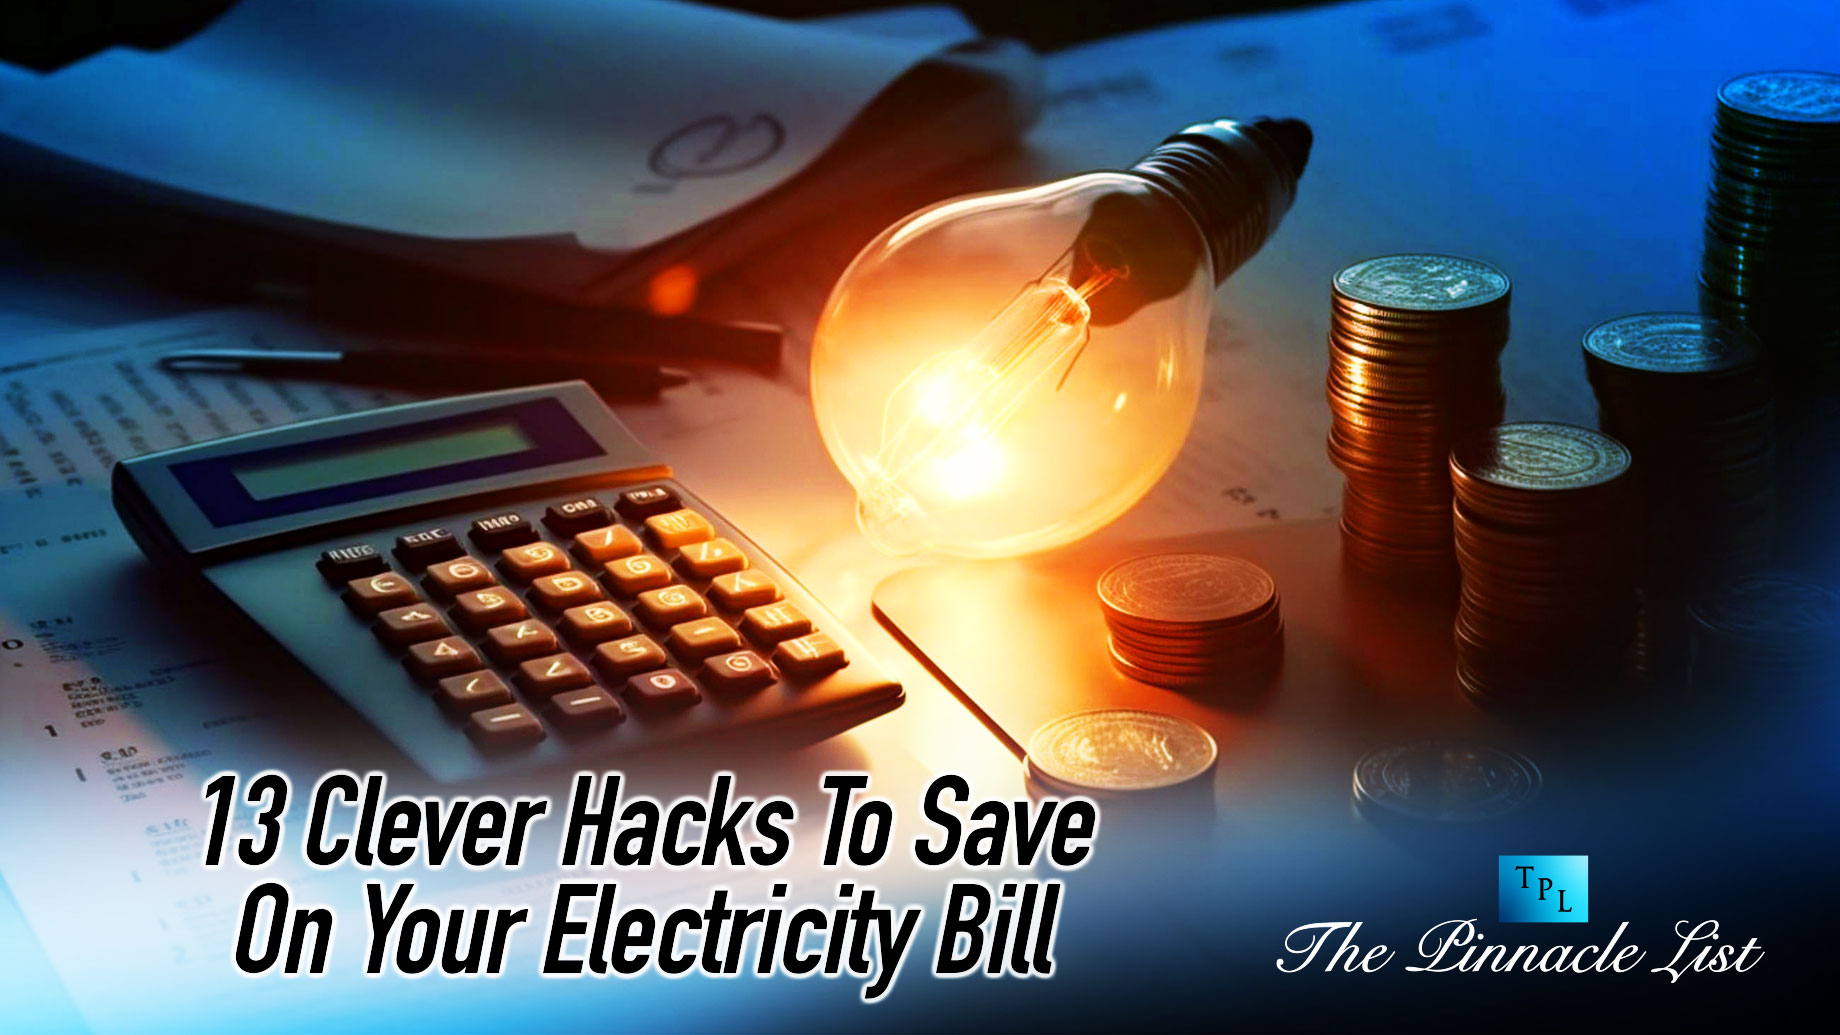 13 Clever Hacks To Save On Your Electricity Bill